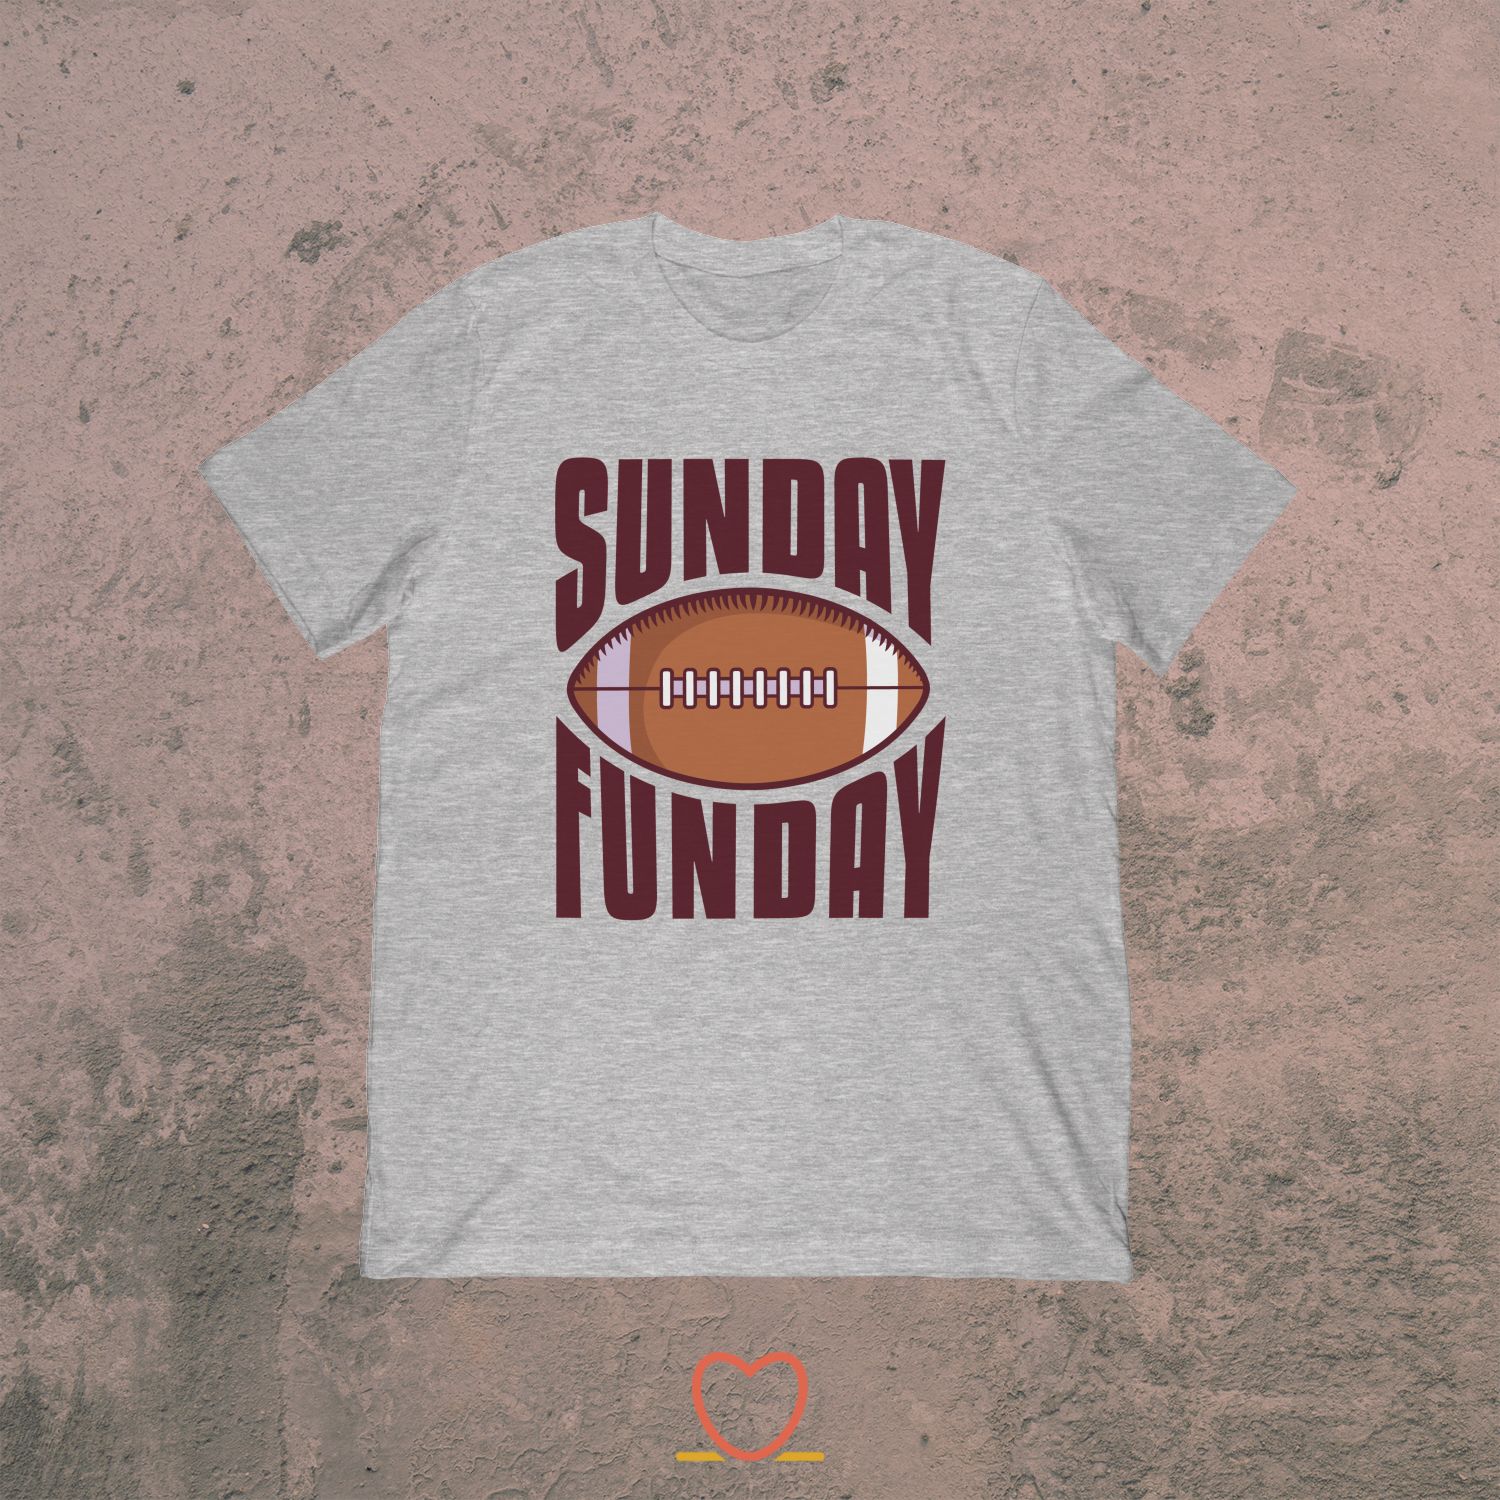 Sunday Funday – US Football Touchdown Tee